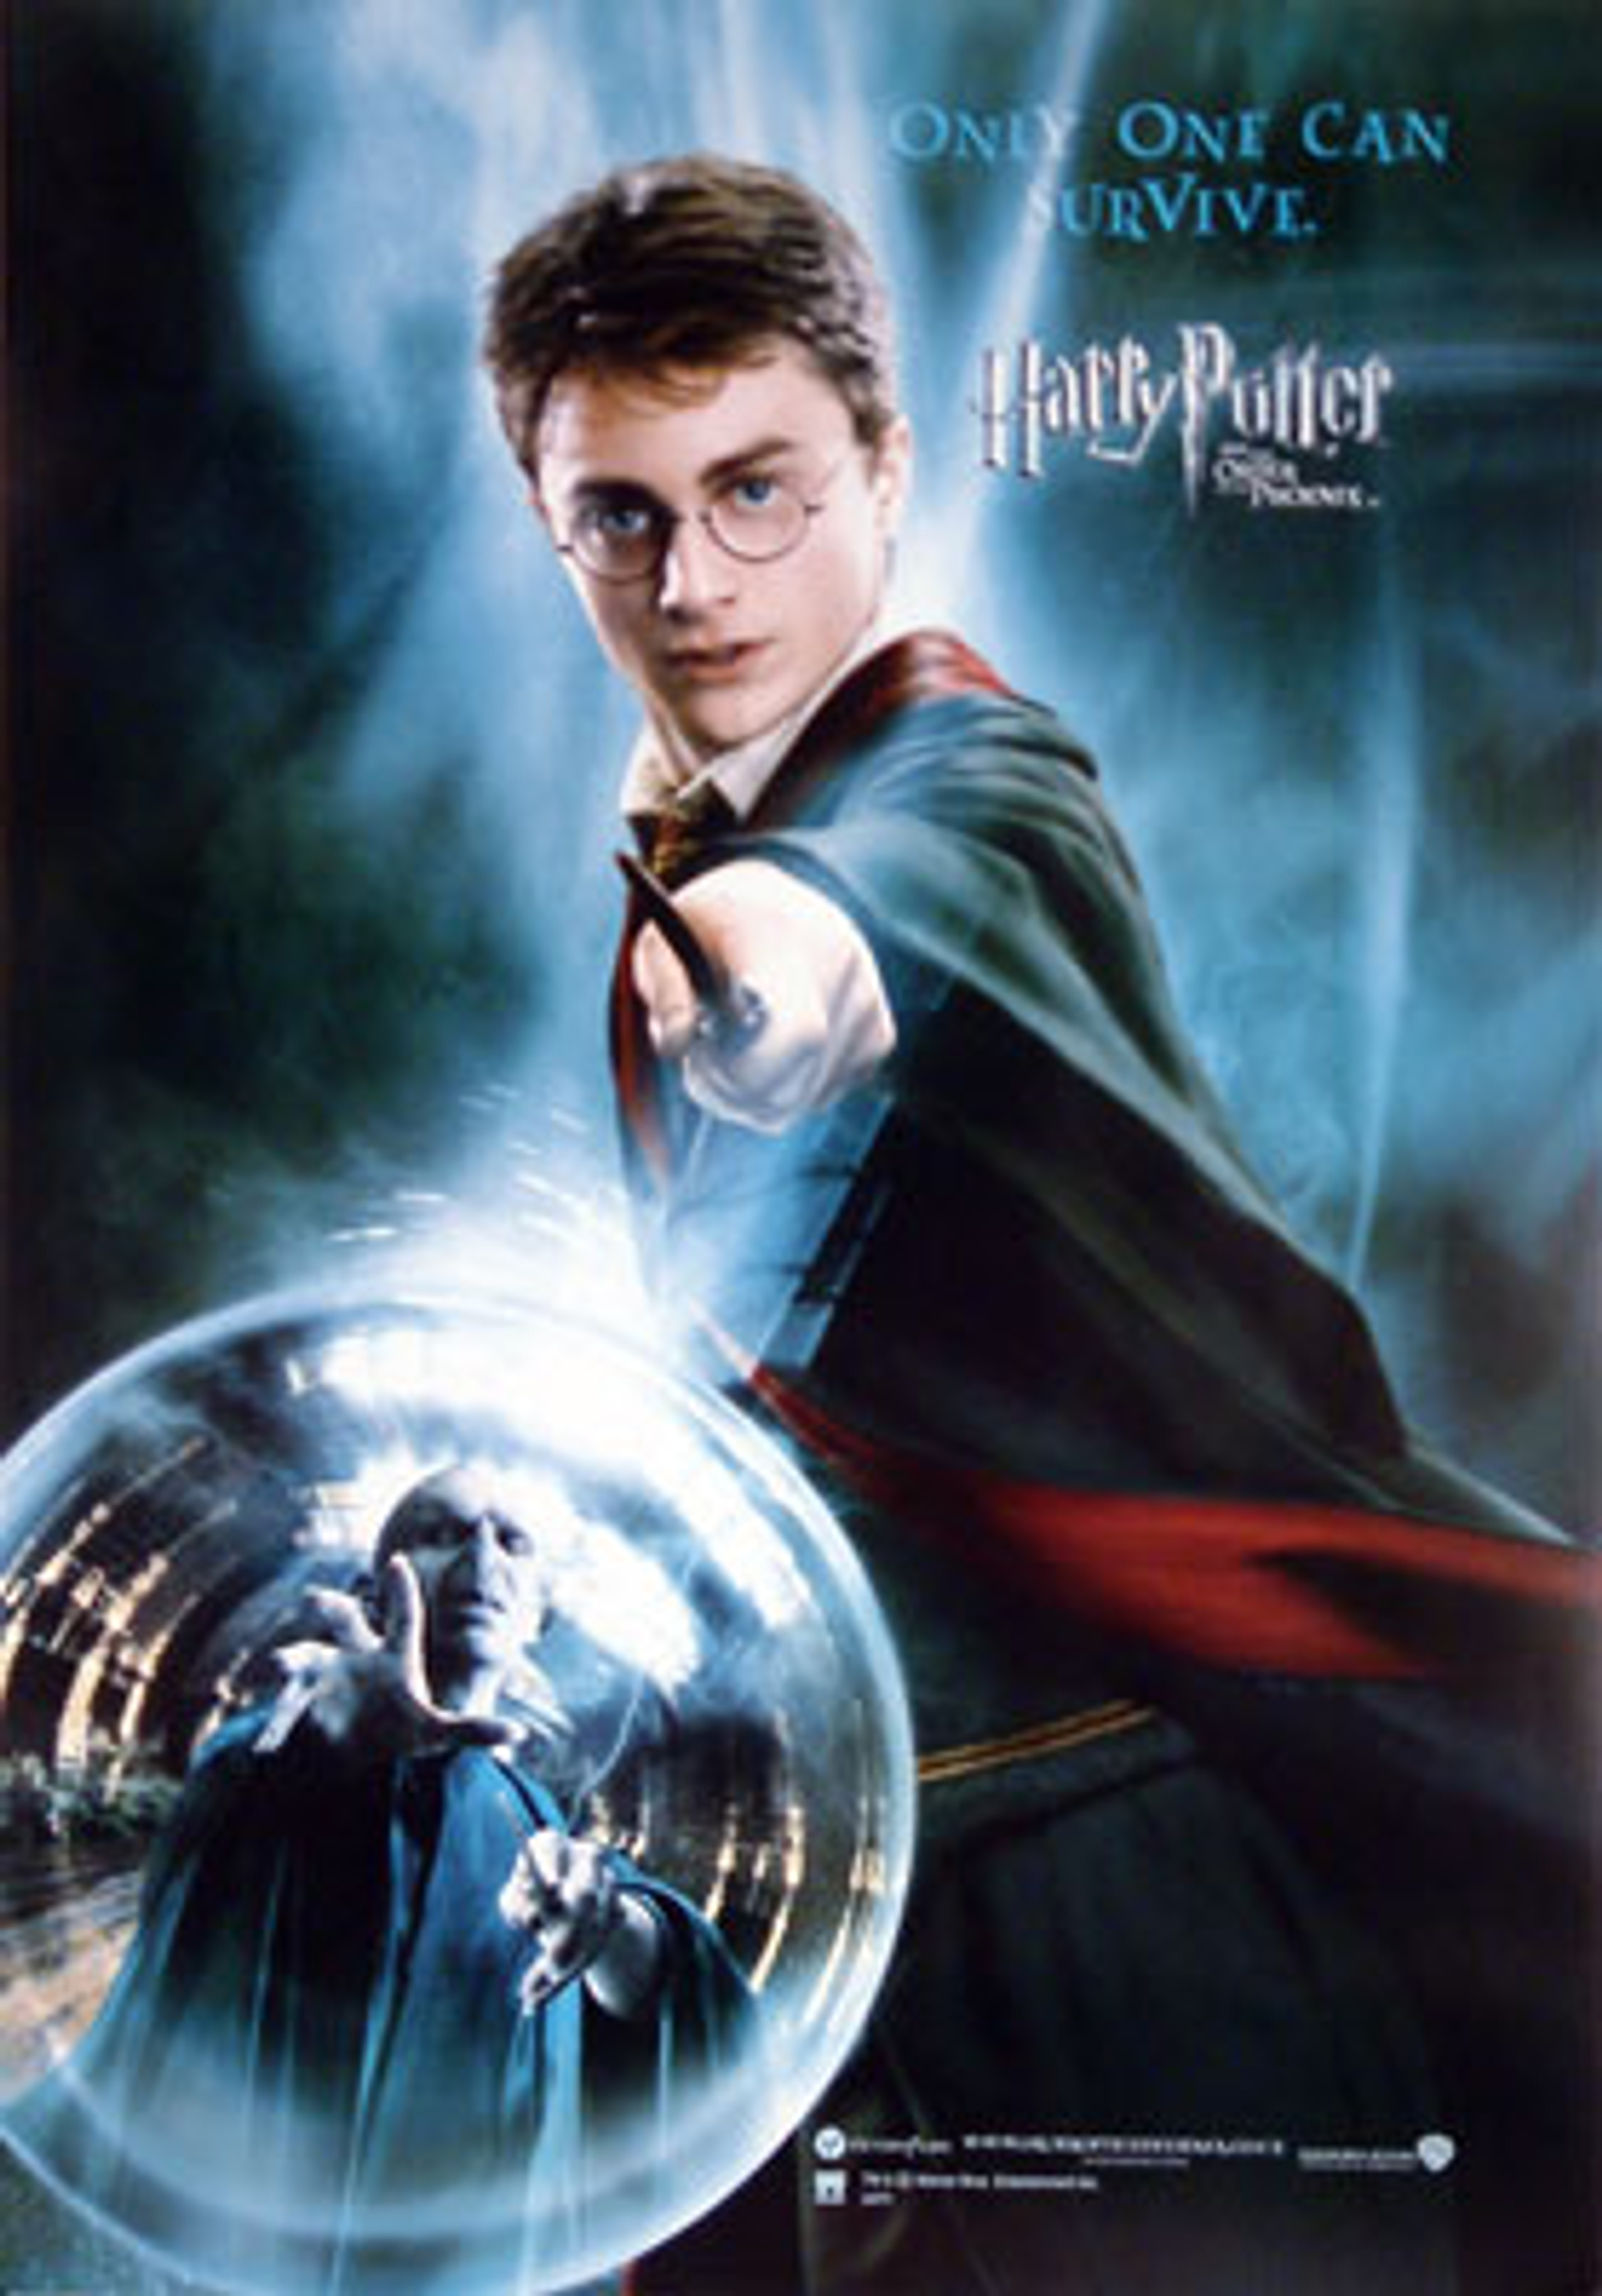 harry potter and the order of the phoenix movie 123movies